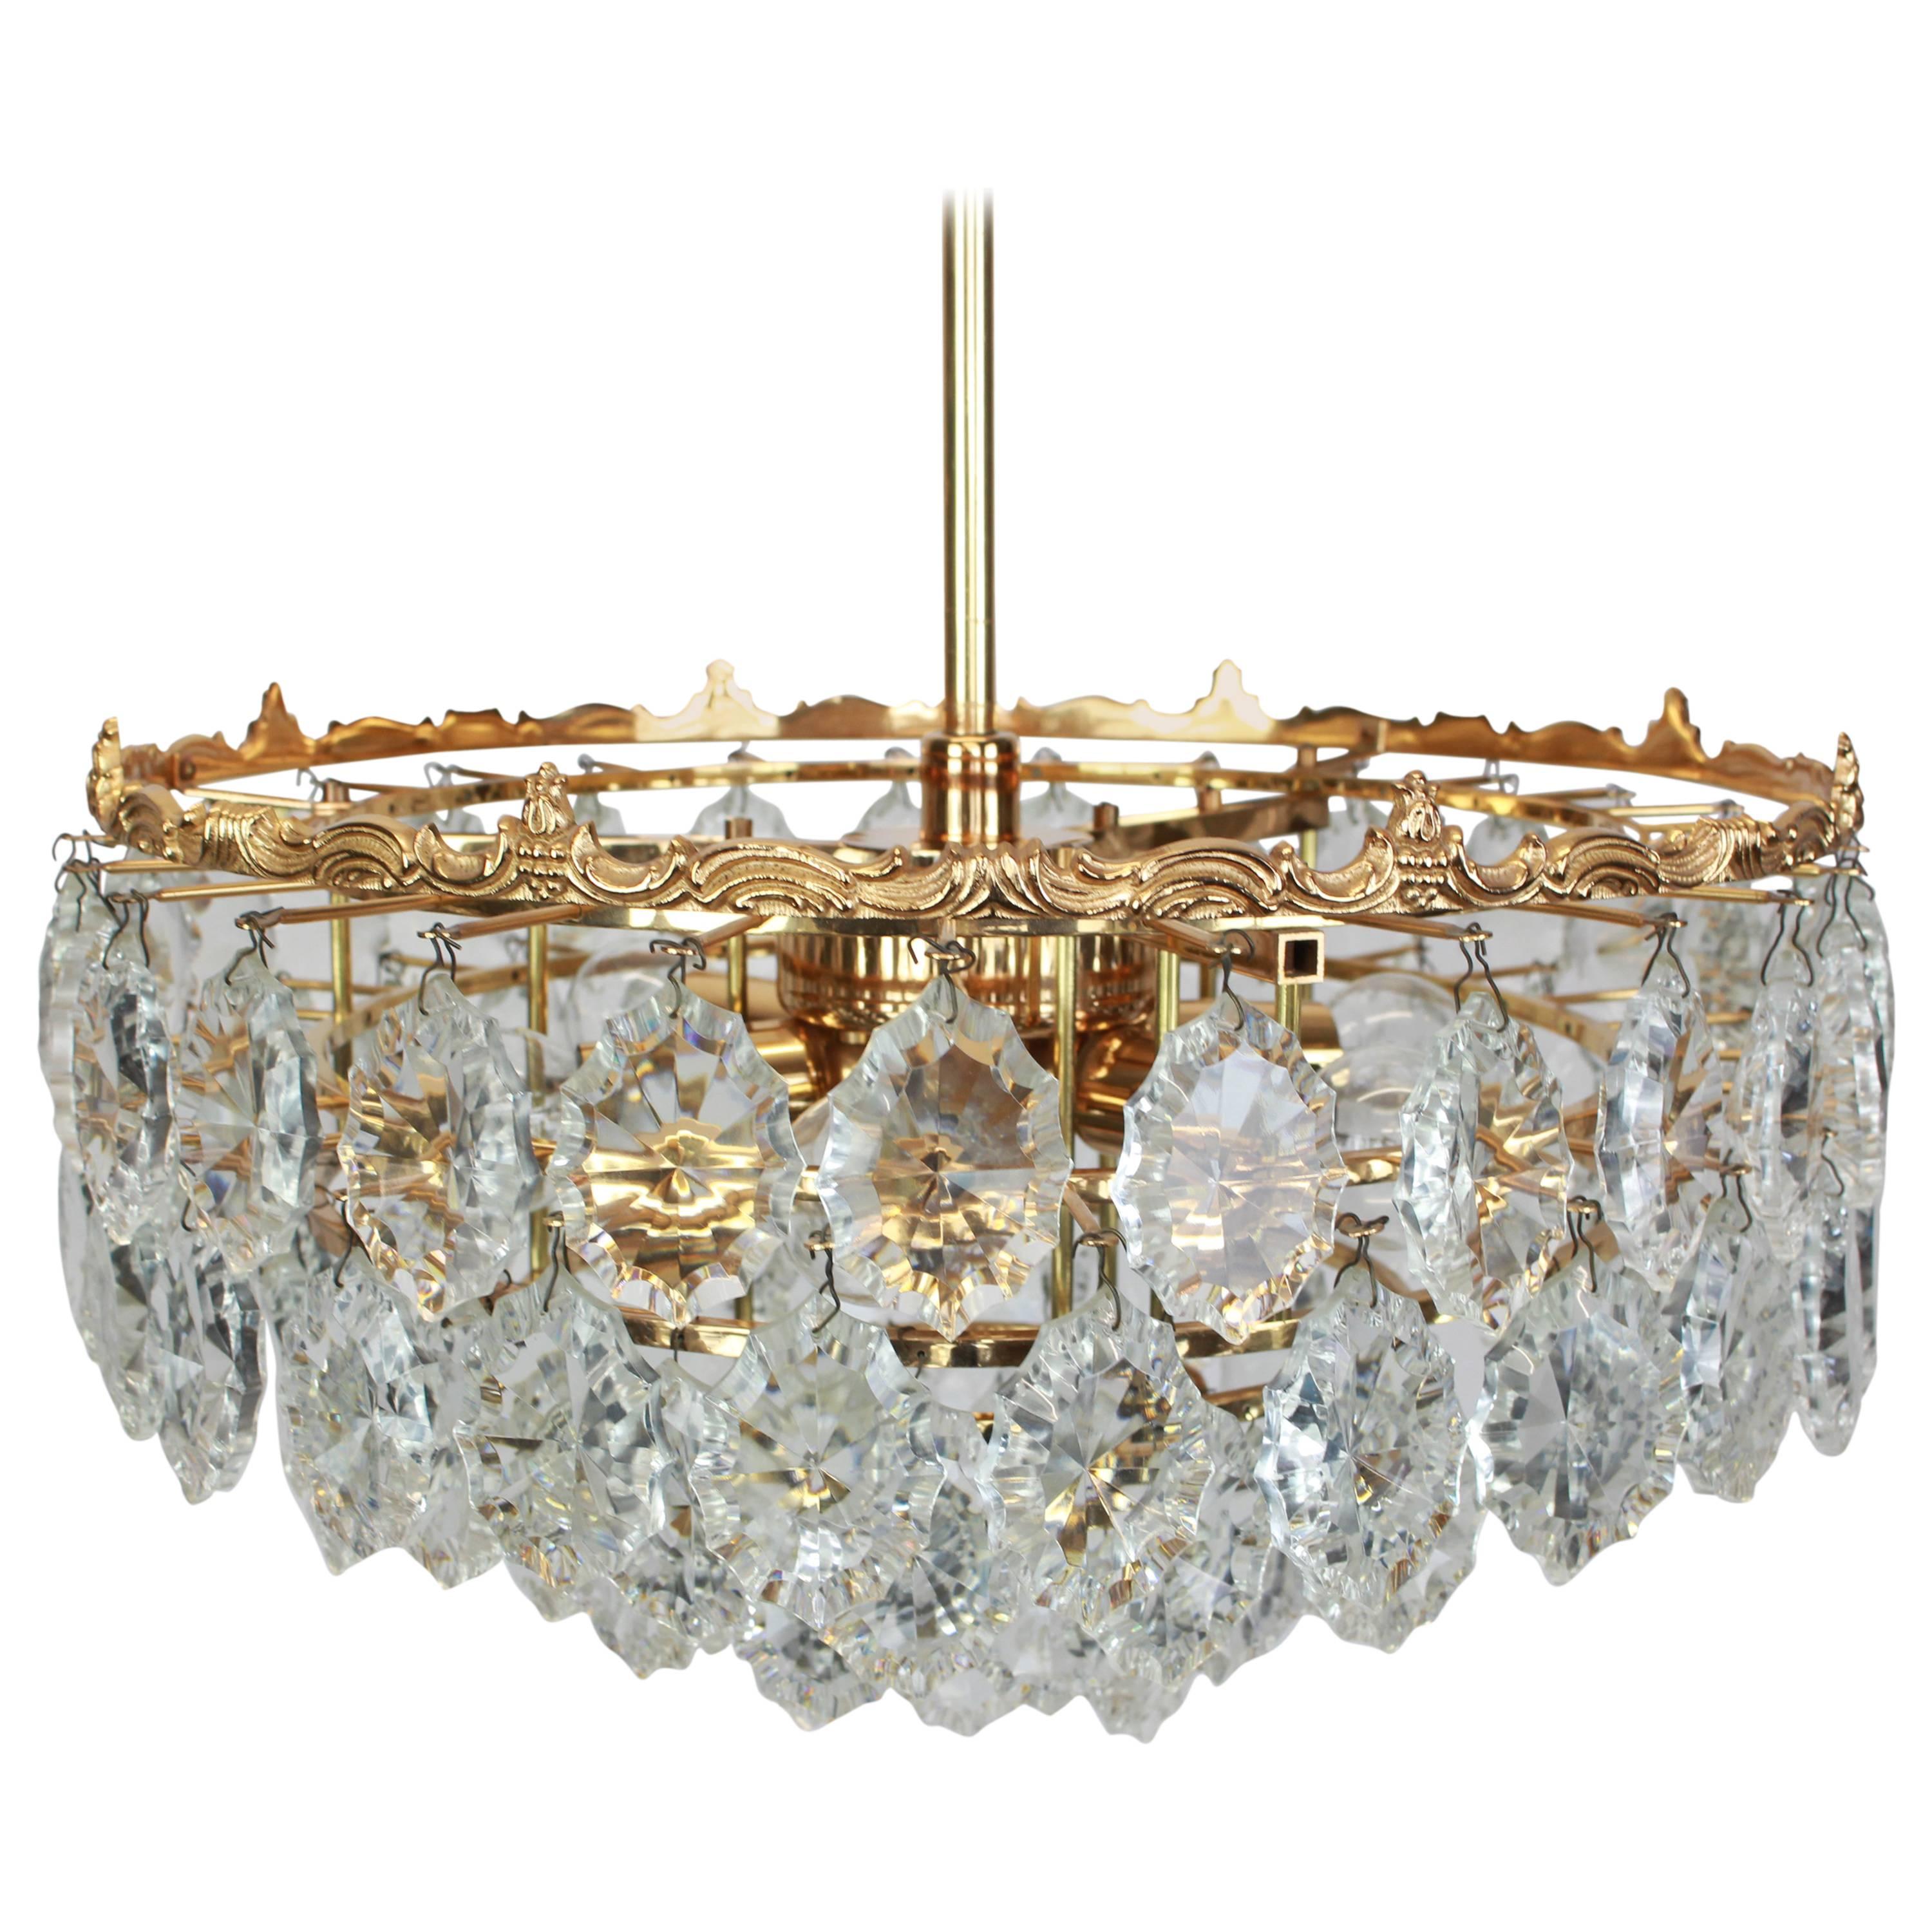 Mid-20th Century Bakalowits Chandelier, Brass and Crystal Glass, Austria, 1960s For Sale